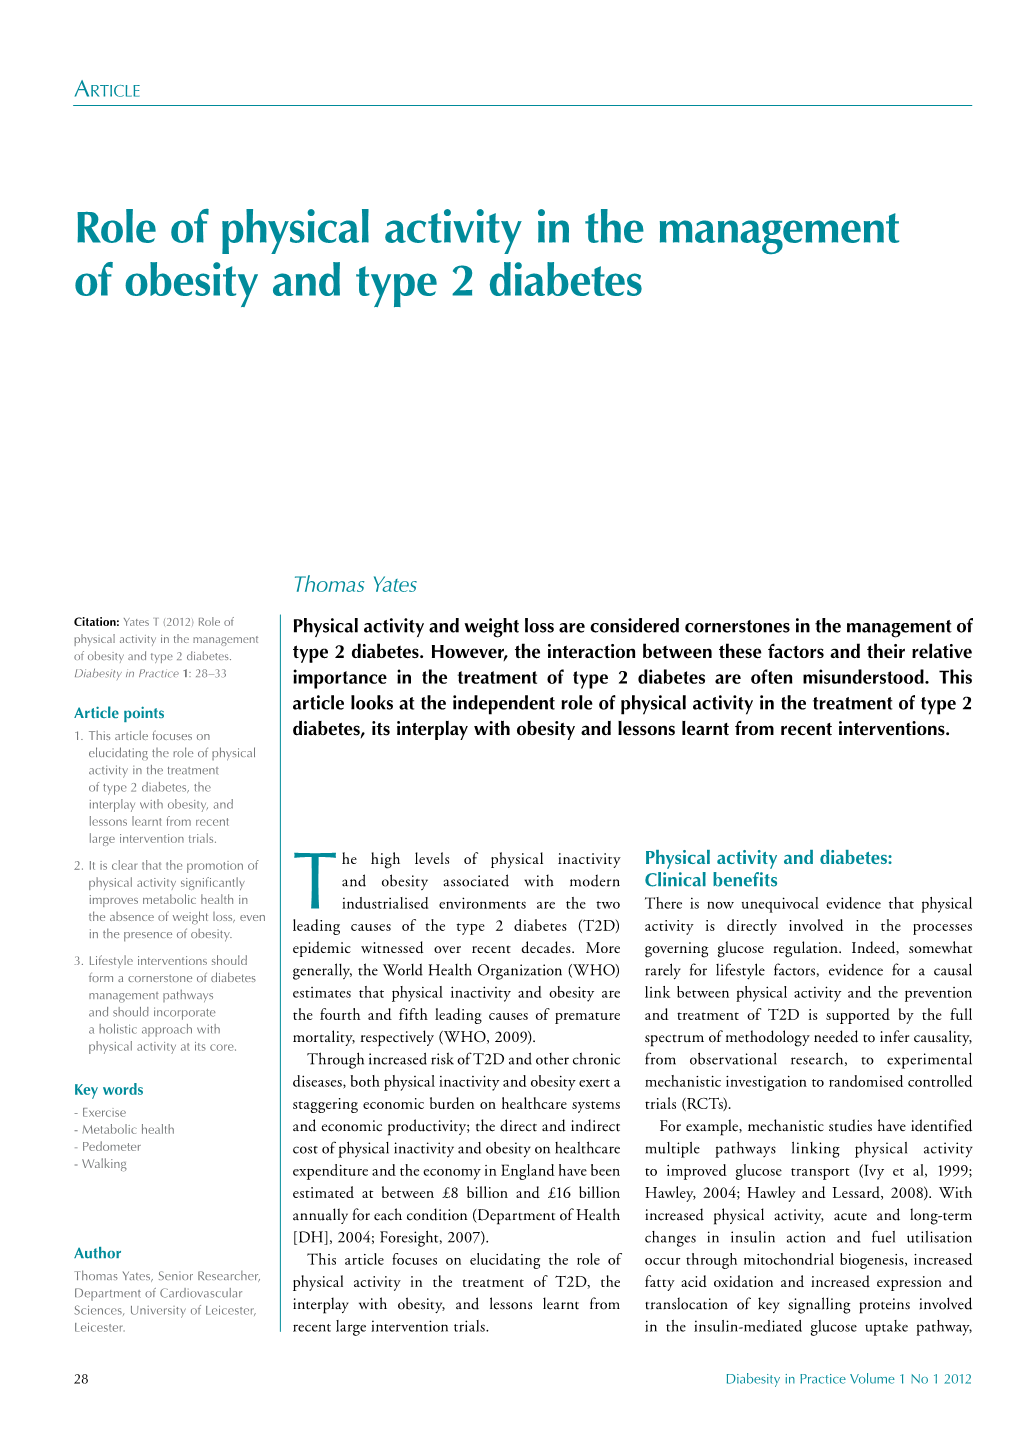 Role of Physical Activity in the Management of Obesity and Type 2 Diabetes